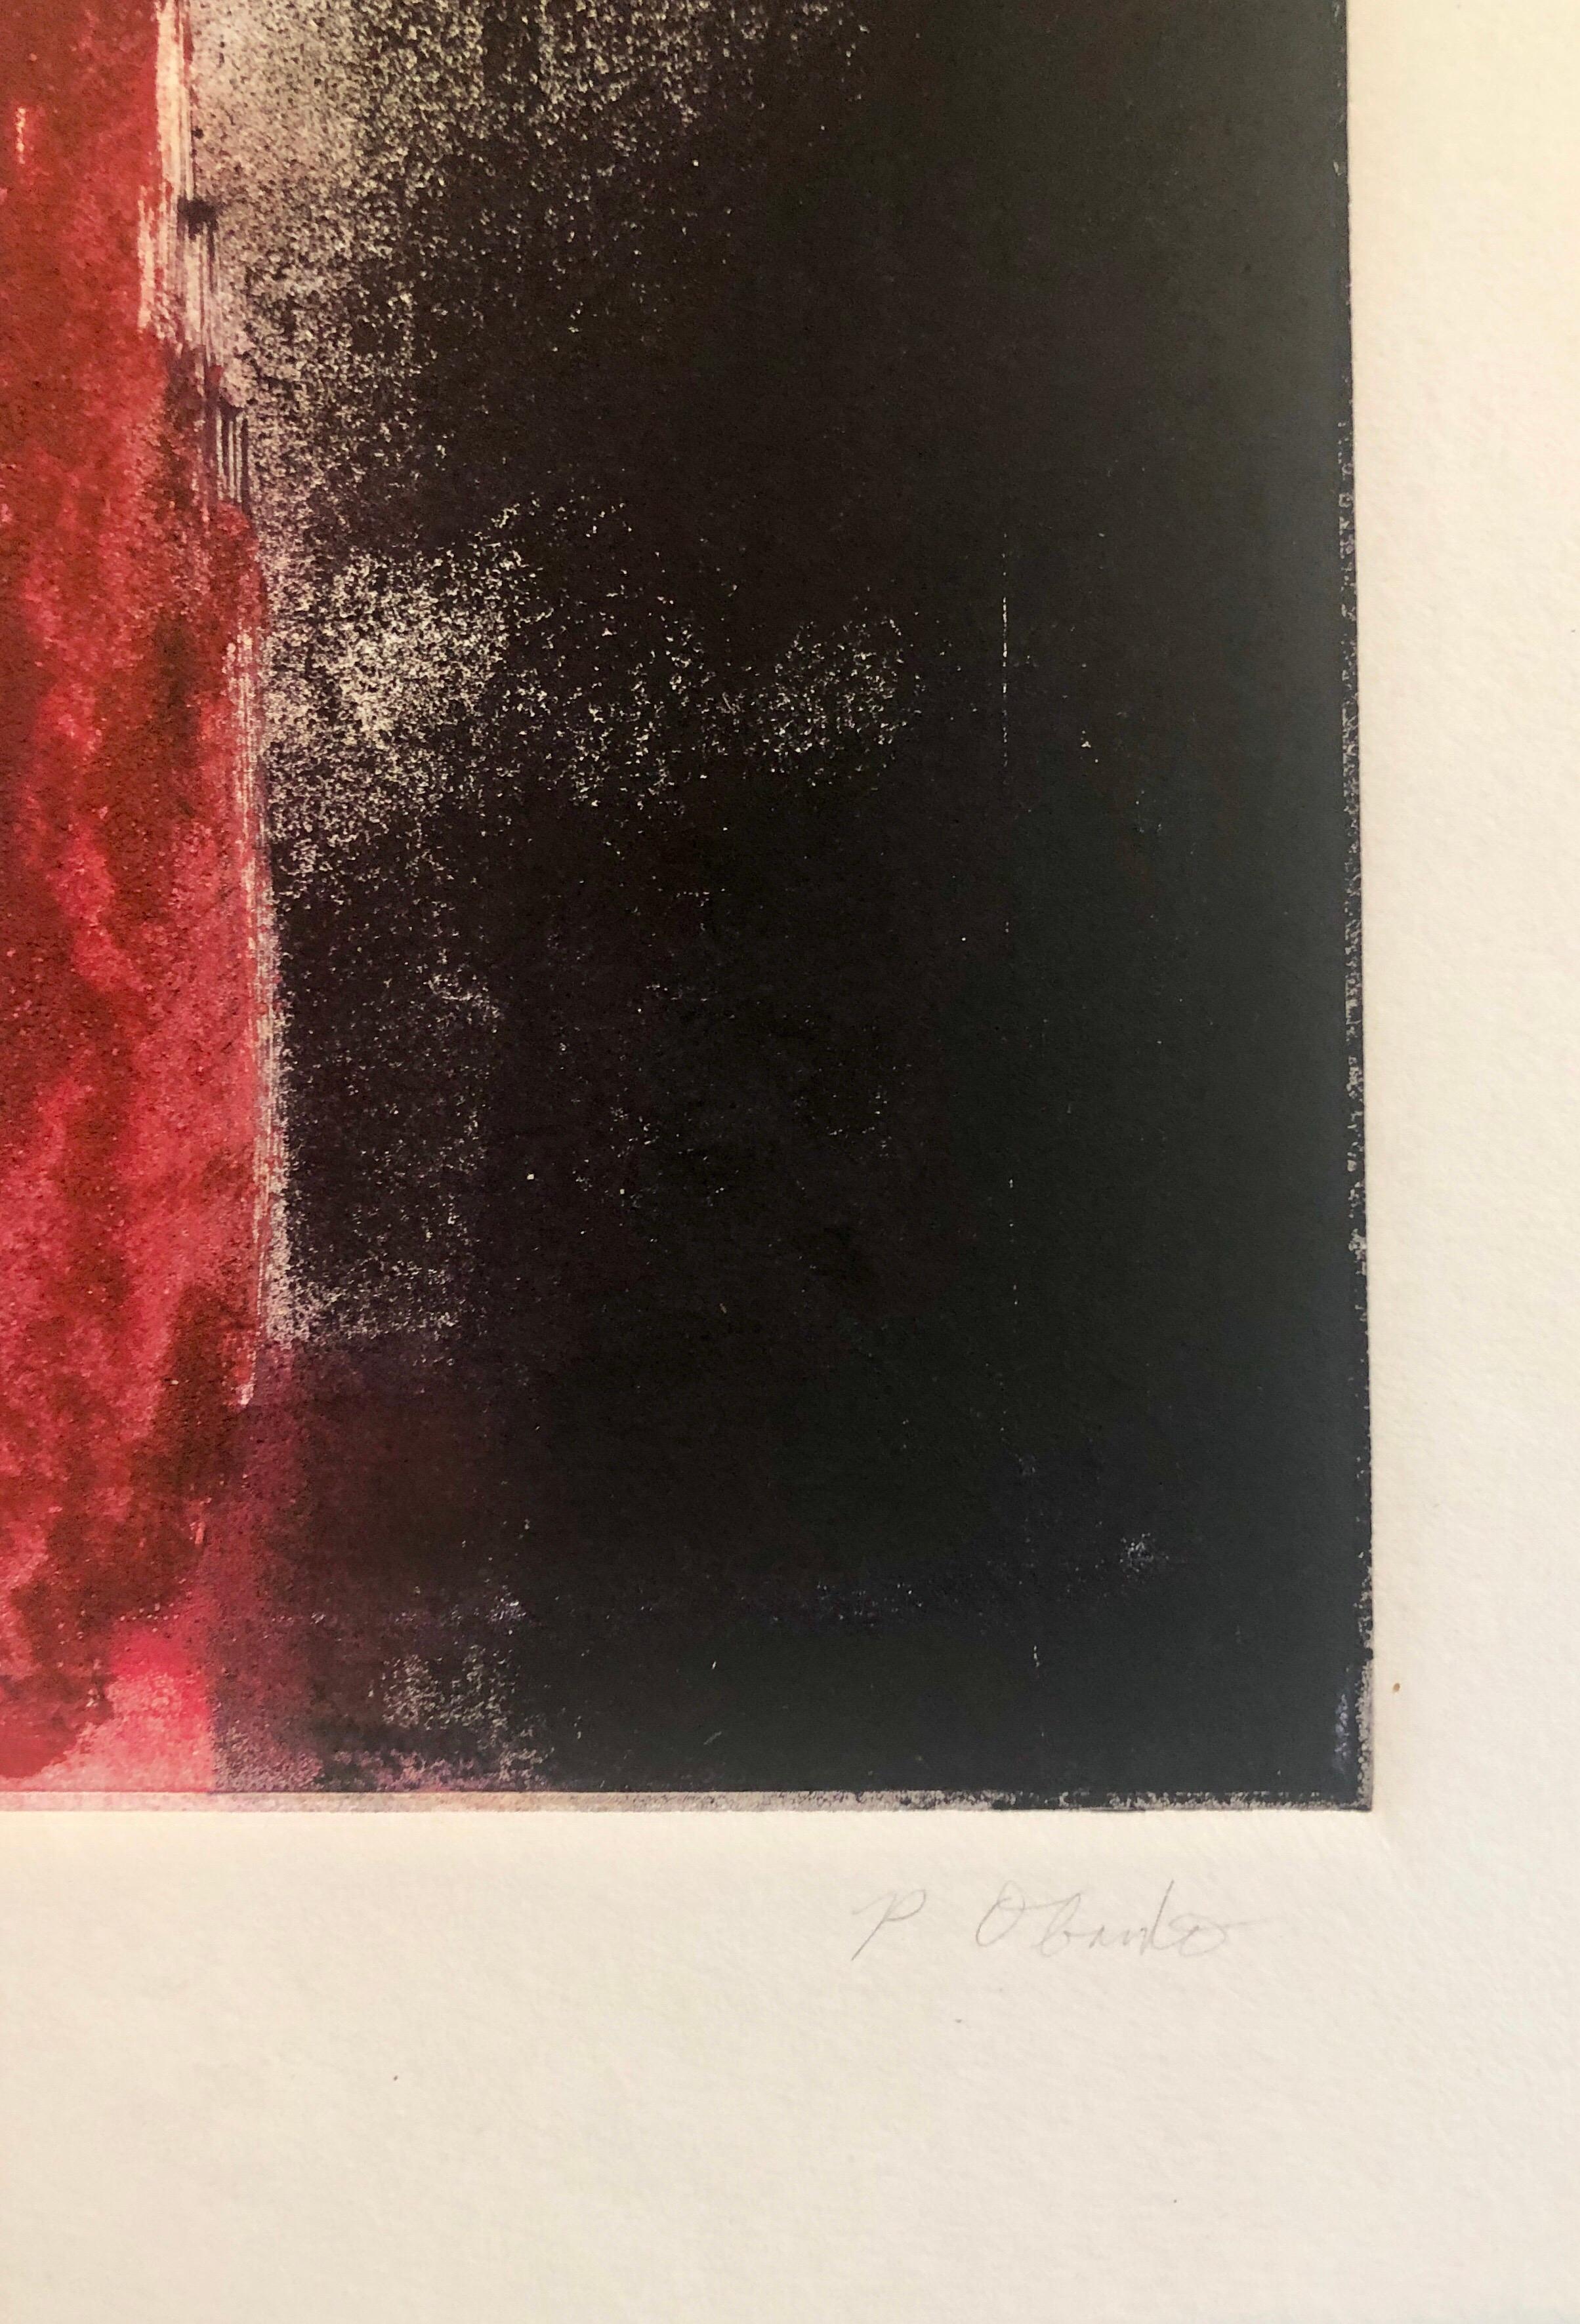 Pierre Andre Obando creates process oriented abstract paintings. He was born in Belize City, Belize and grew up in the Caribbean, the U.S. Virgin Islands, Miami, Fl and Jackson, MS.

Pierre Obando completed his MFA at Hunter College and completed